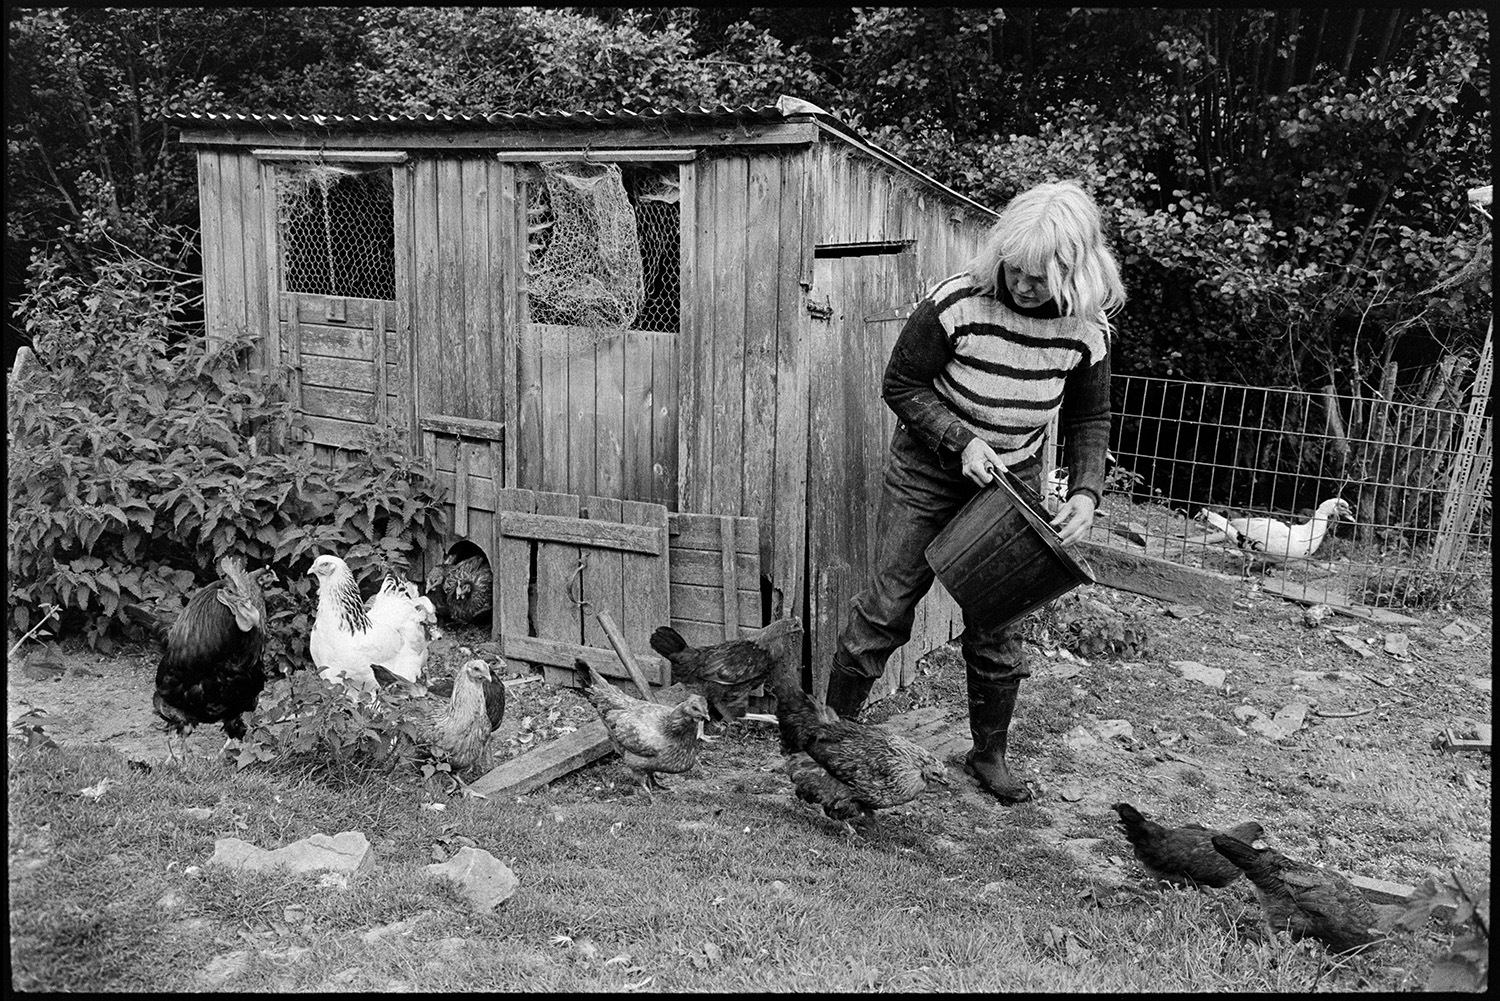 Woman feeding chickens, geese. Poultry house. 
[Jo Curzon feeding chickens by a poultry house at Millhams, Dolton. A duck can be seen behind a wire fence in the background.]